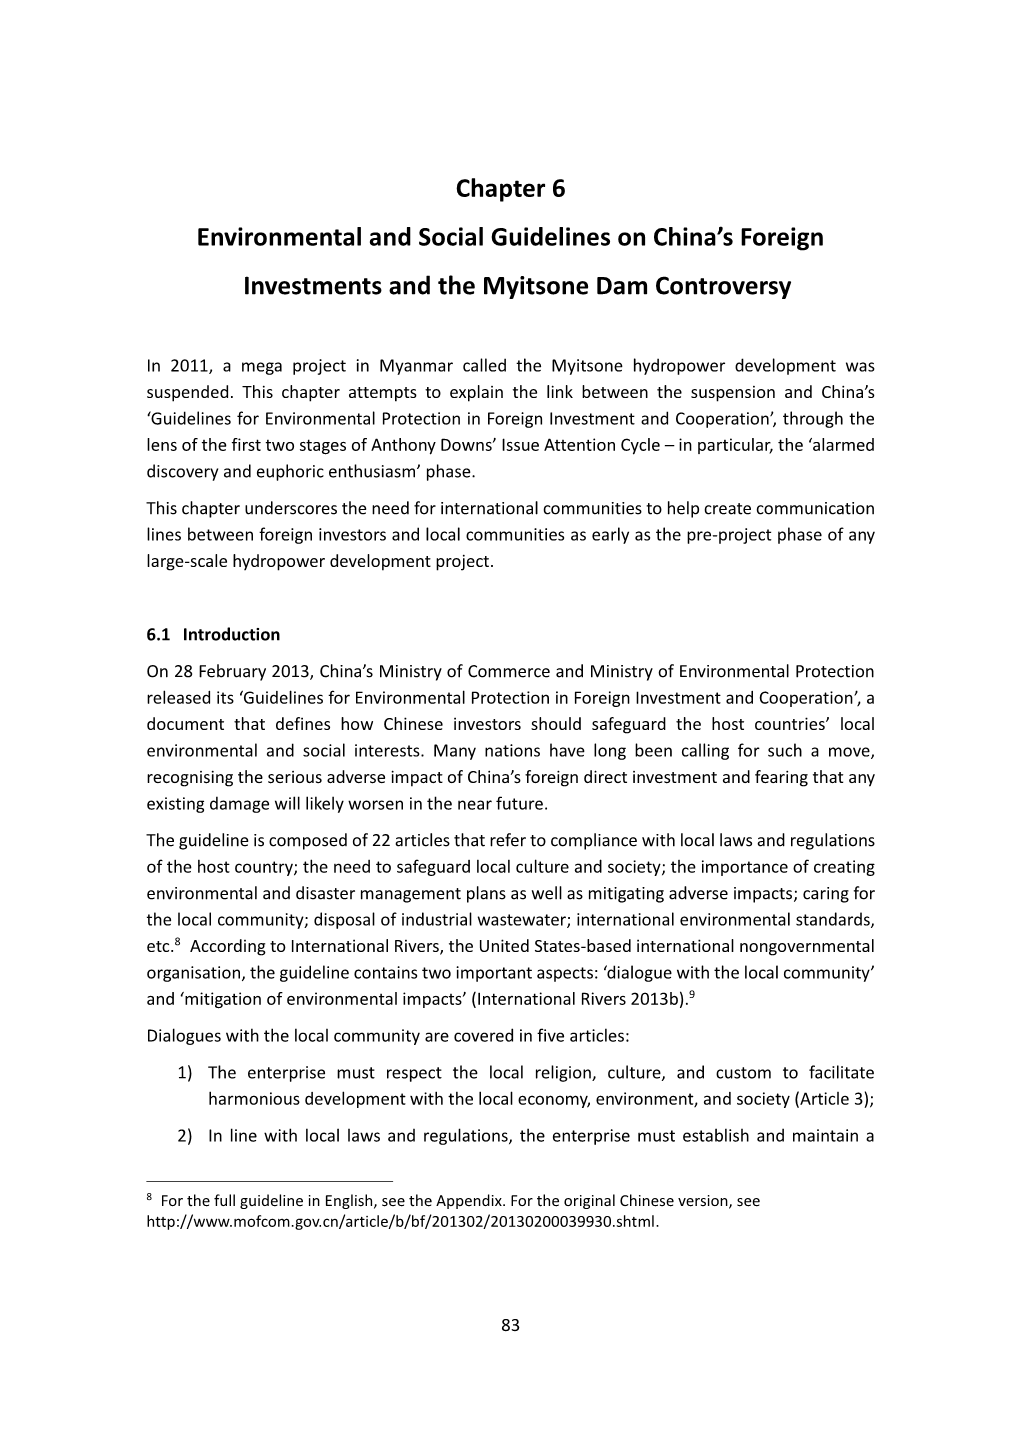 Chapter 6. Environmental and Social Guidelines on China's Foreign